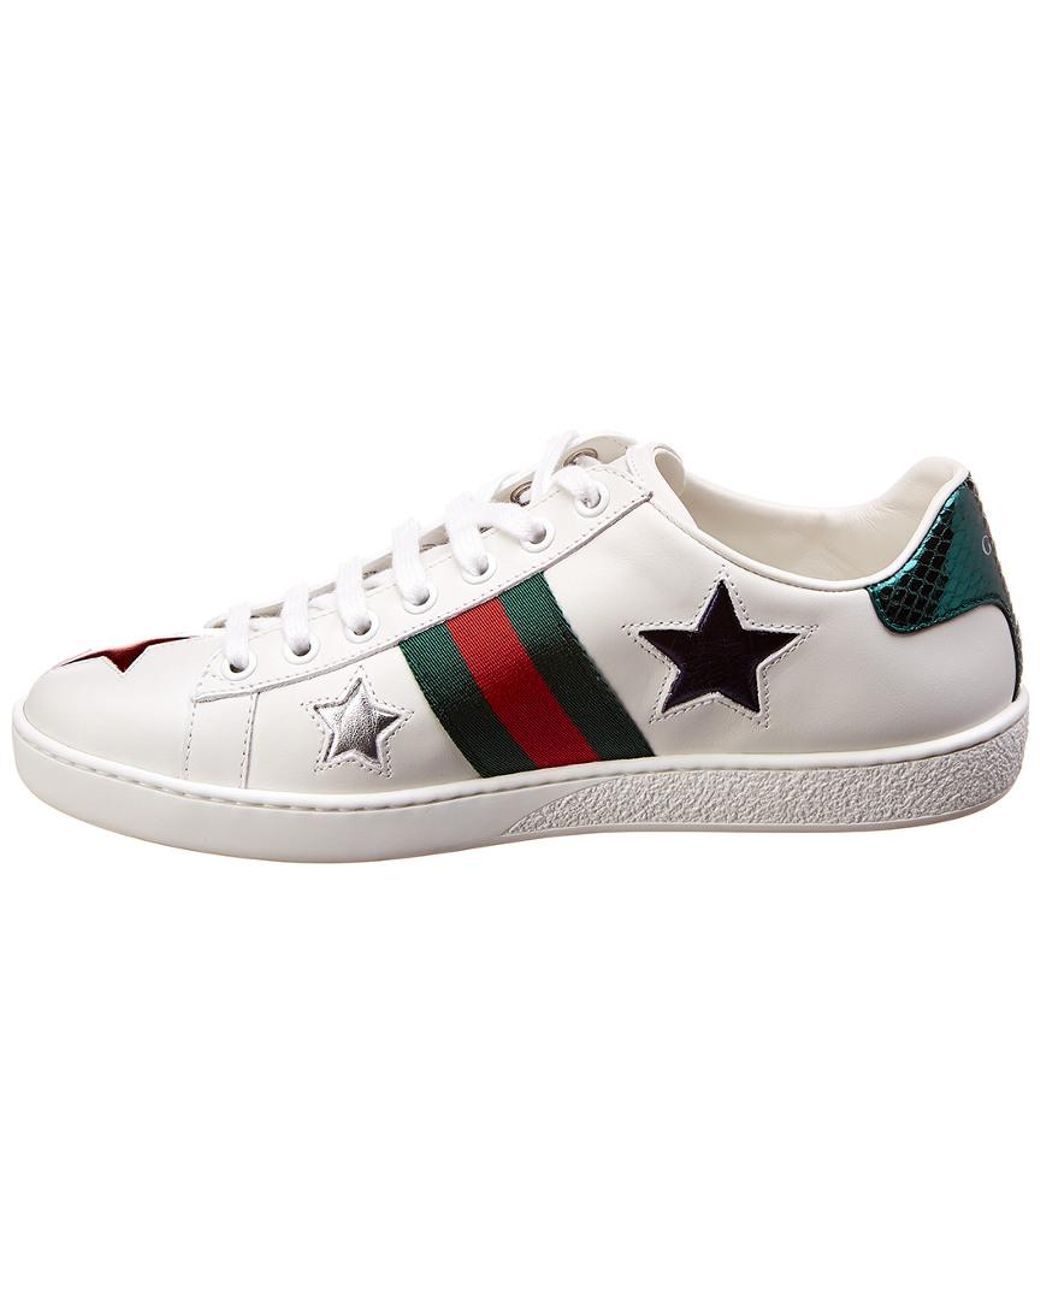 Afvige Lam opnå Gucci Ace Star Embroidered Leather Sneaker | Lyst